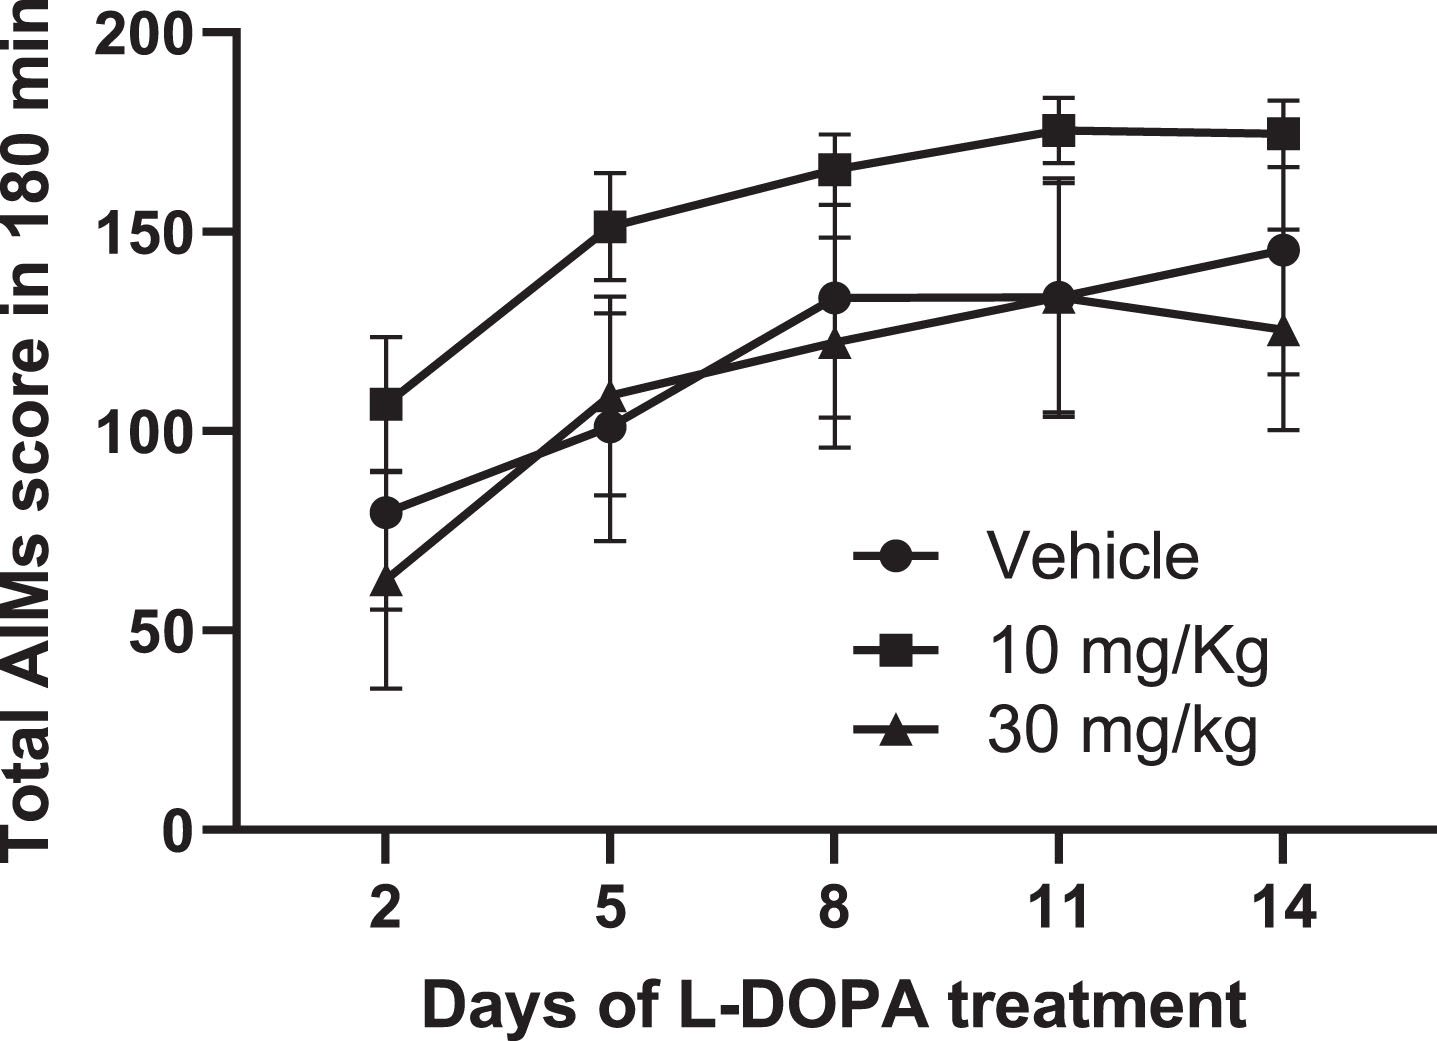 The metabotropic glutamate receptor 4 positive allosteric modulator, Lu AF21934, fails to affect the development of abnormal involuntary movements (AIMs) in 6-OHDA lesioned rat model of L-DOPA-induced dyskinesia. Time course of AIMs development, expressed as total AIMs score per 180 min, is shown for 6-OHDA lesioned rats treated once-daily for 14 days with L-DOPA (6.25 mg/kg + benserazide (15 mg/kg) s.c.), administered 30 min after pre-treatment with either vehicle (n = 6), 10 mg/kg Lu AF21934 (n = 7) or 30 mg/kg Lu AF21934 (n = 7). Data are displayed as mean±S.E.M. While there was a significant effect of time on total AIMs score, there was no effect of treatment (p > 0.05; two-way RM ANOVA with Bonferroni post-hoc test).